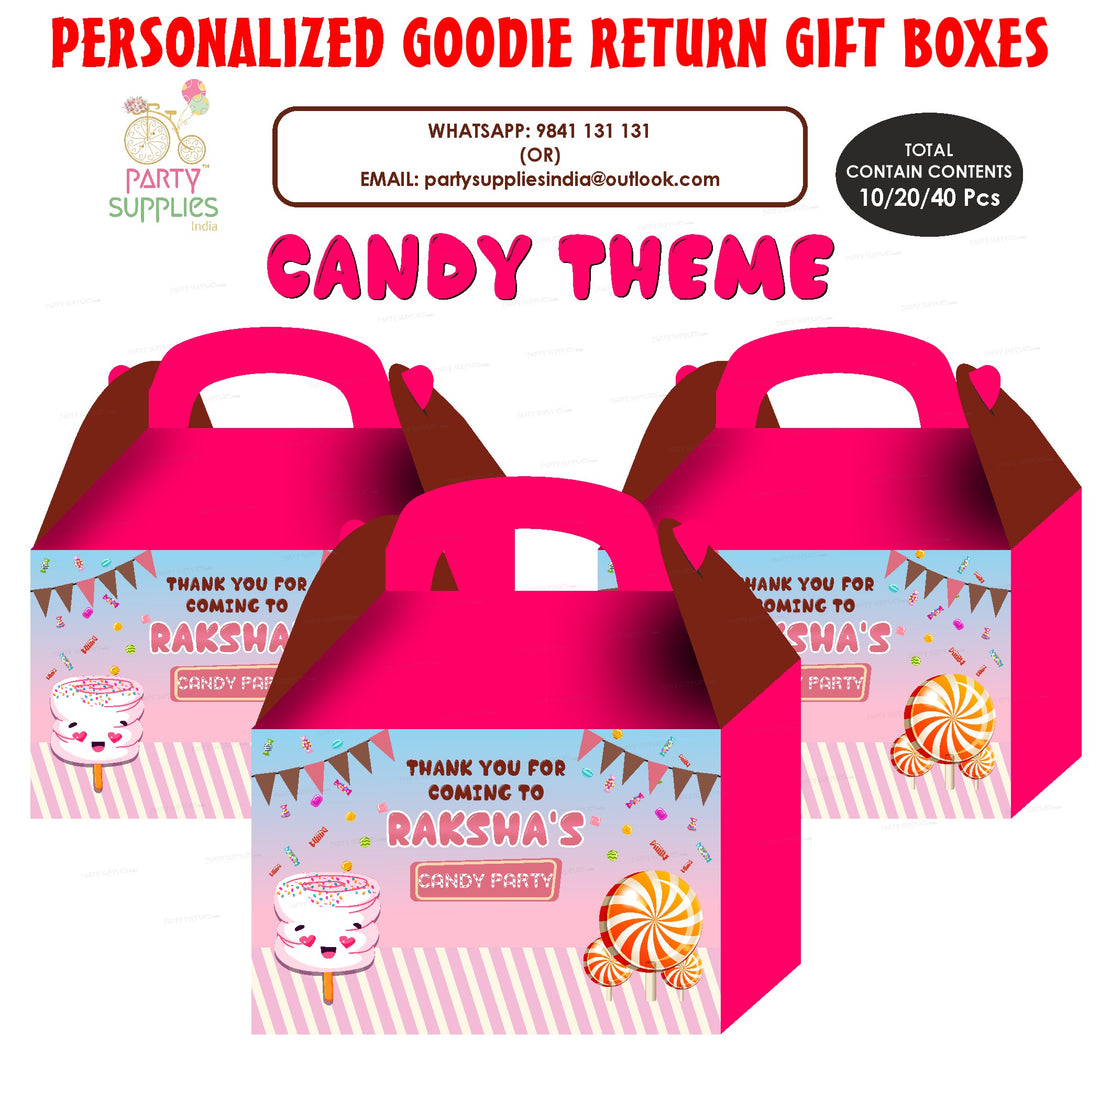 PSI Candy Theme Goodie Return Gift Boxes